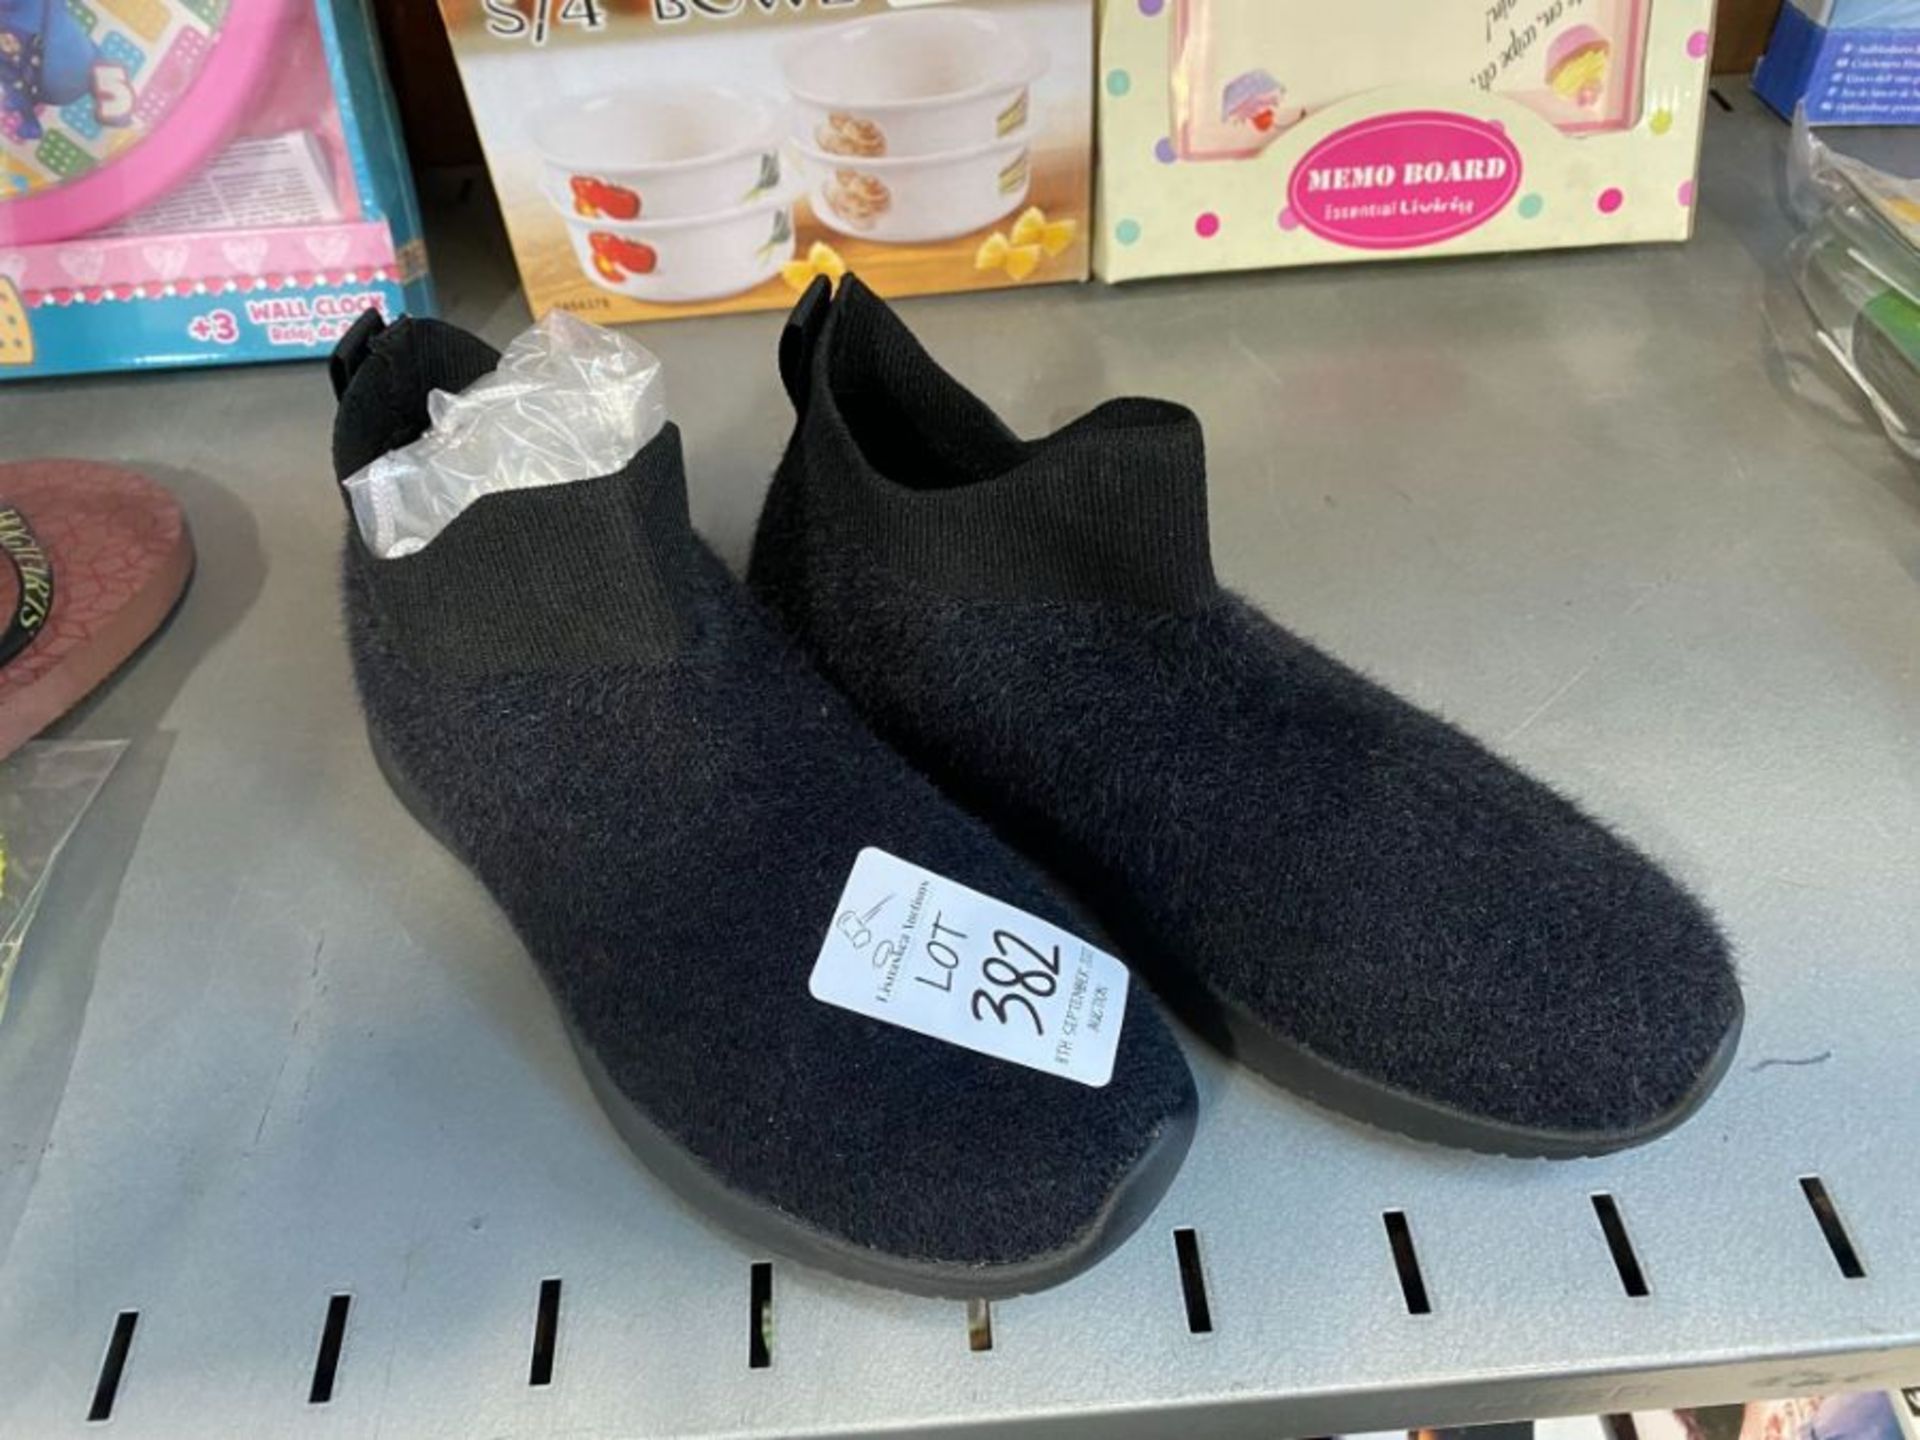 PAIR OF MAIITRIP SLIP-ON SHOES (SIZE 36) (NEW)